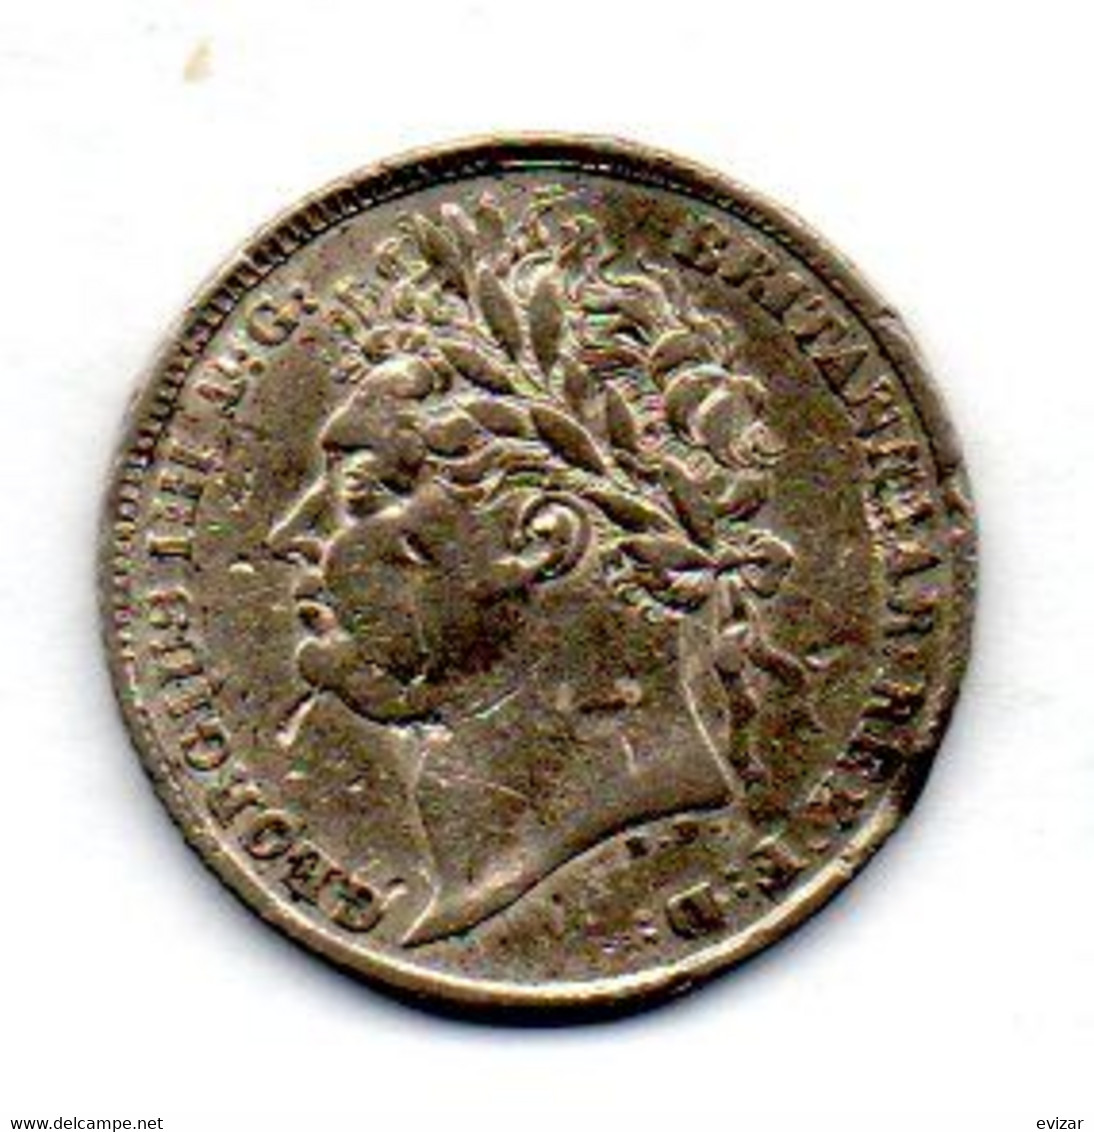 GREAT BRITAIN, 6 Pence, Silver, Year 1821, KM #678 - H. 6 Pence